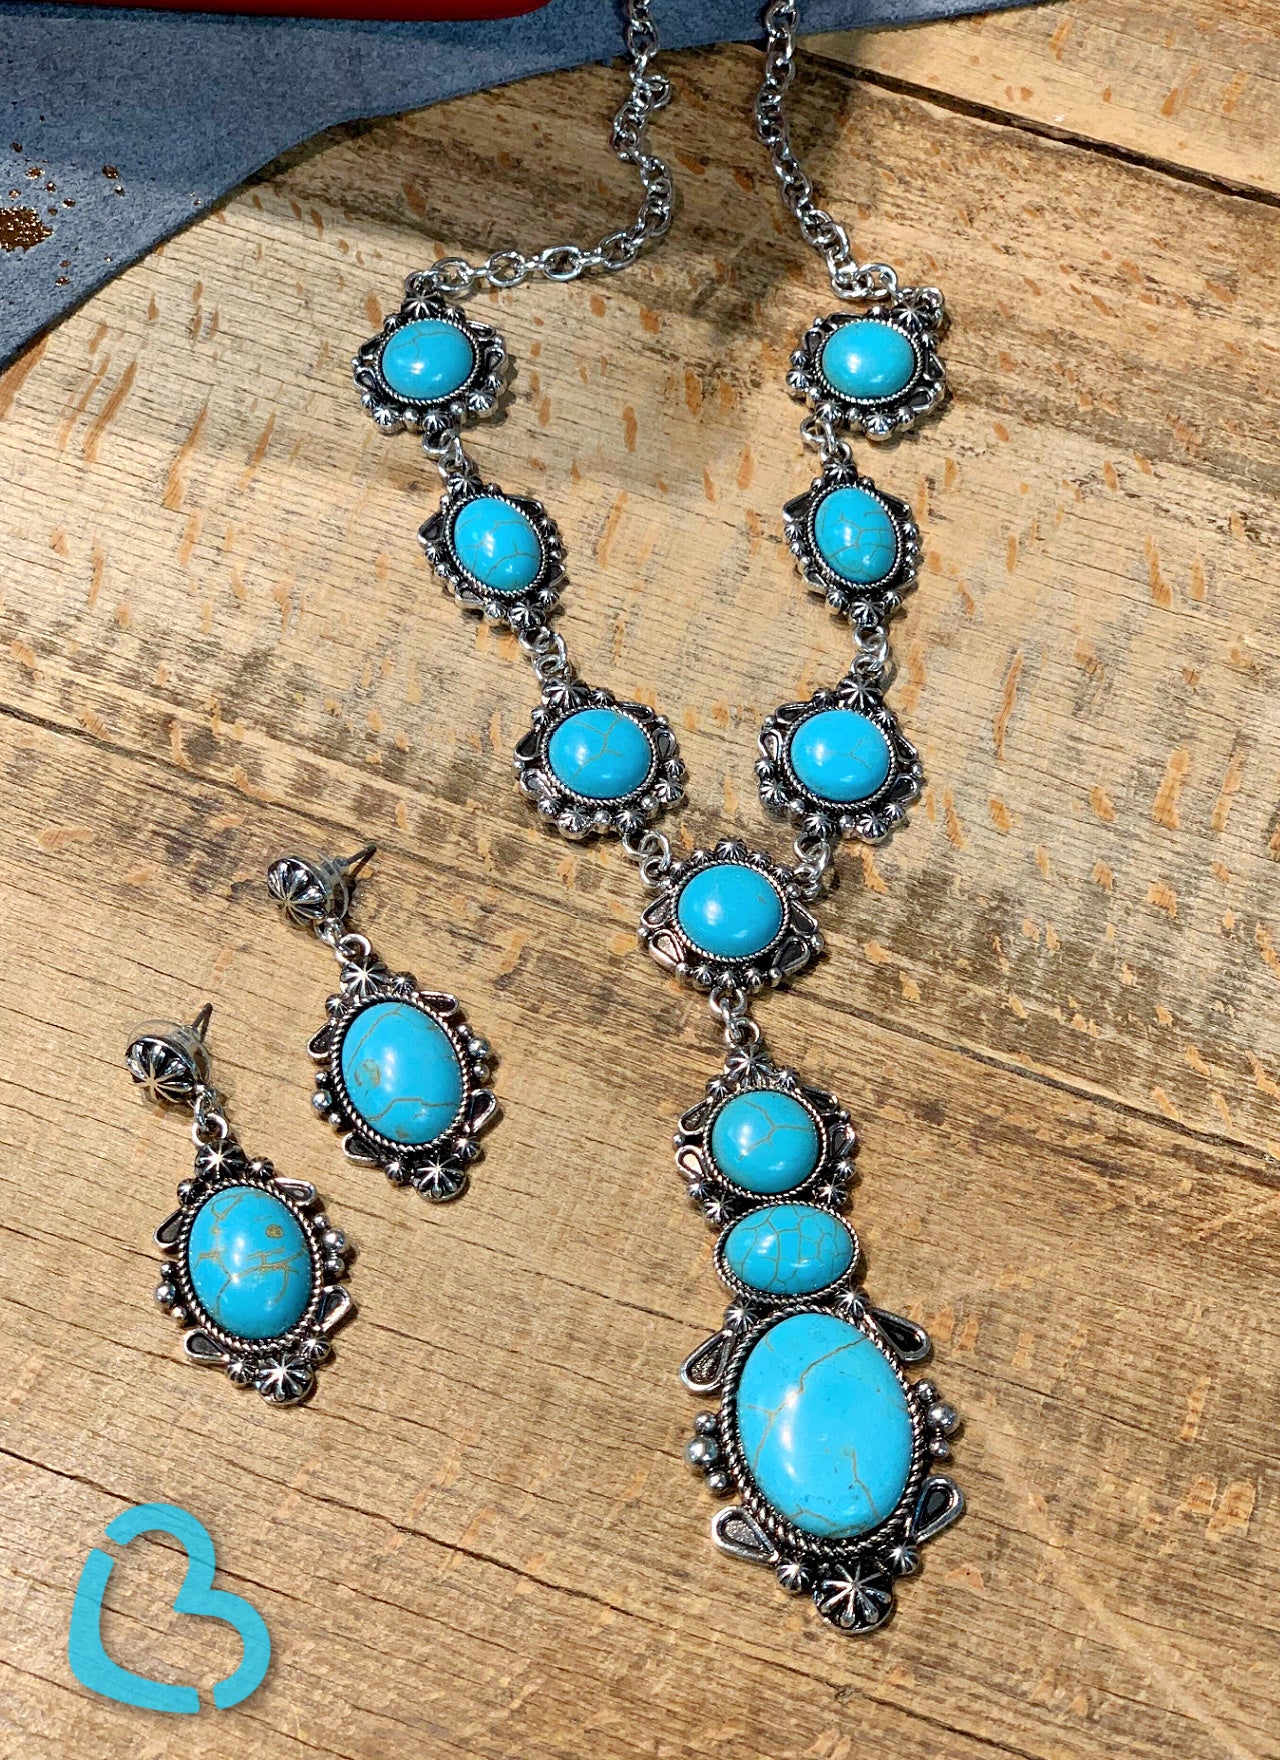 The Murrieta Turquoise Necklace and Earring Set Jewelry 176 